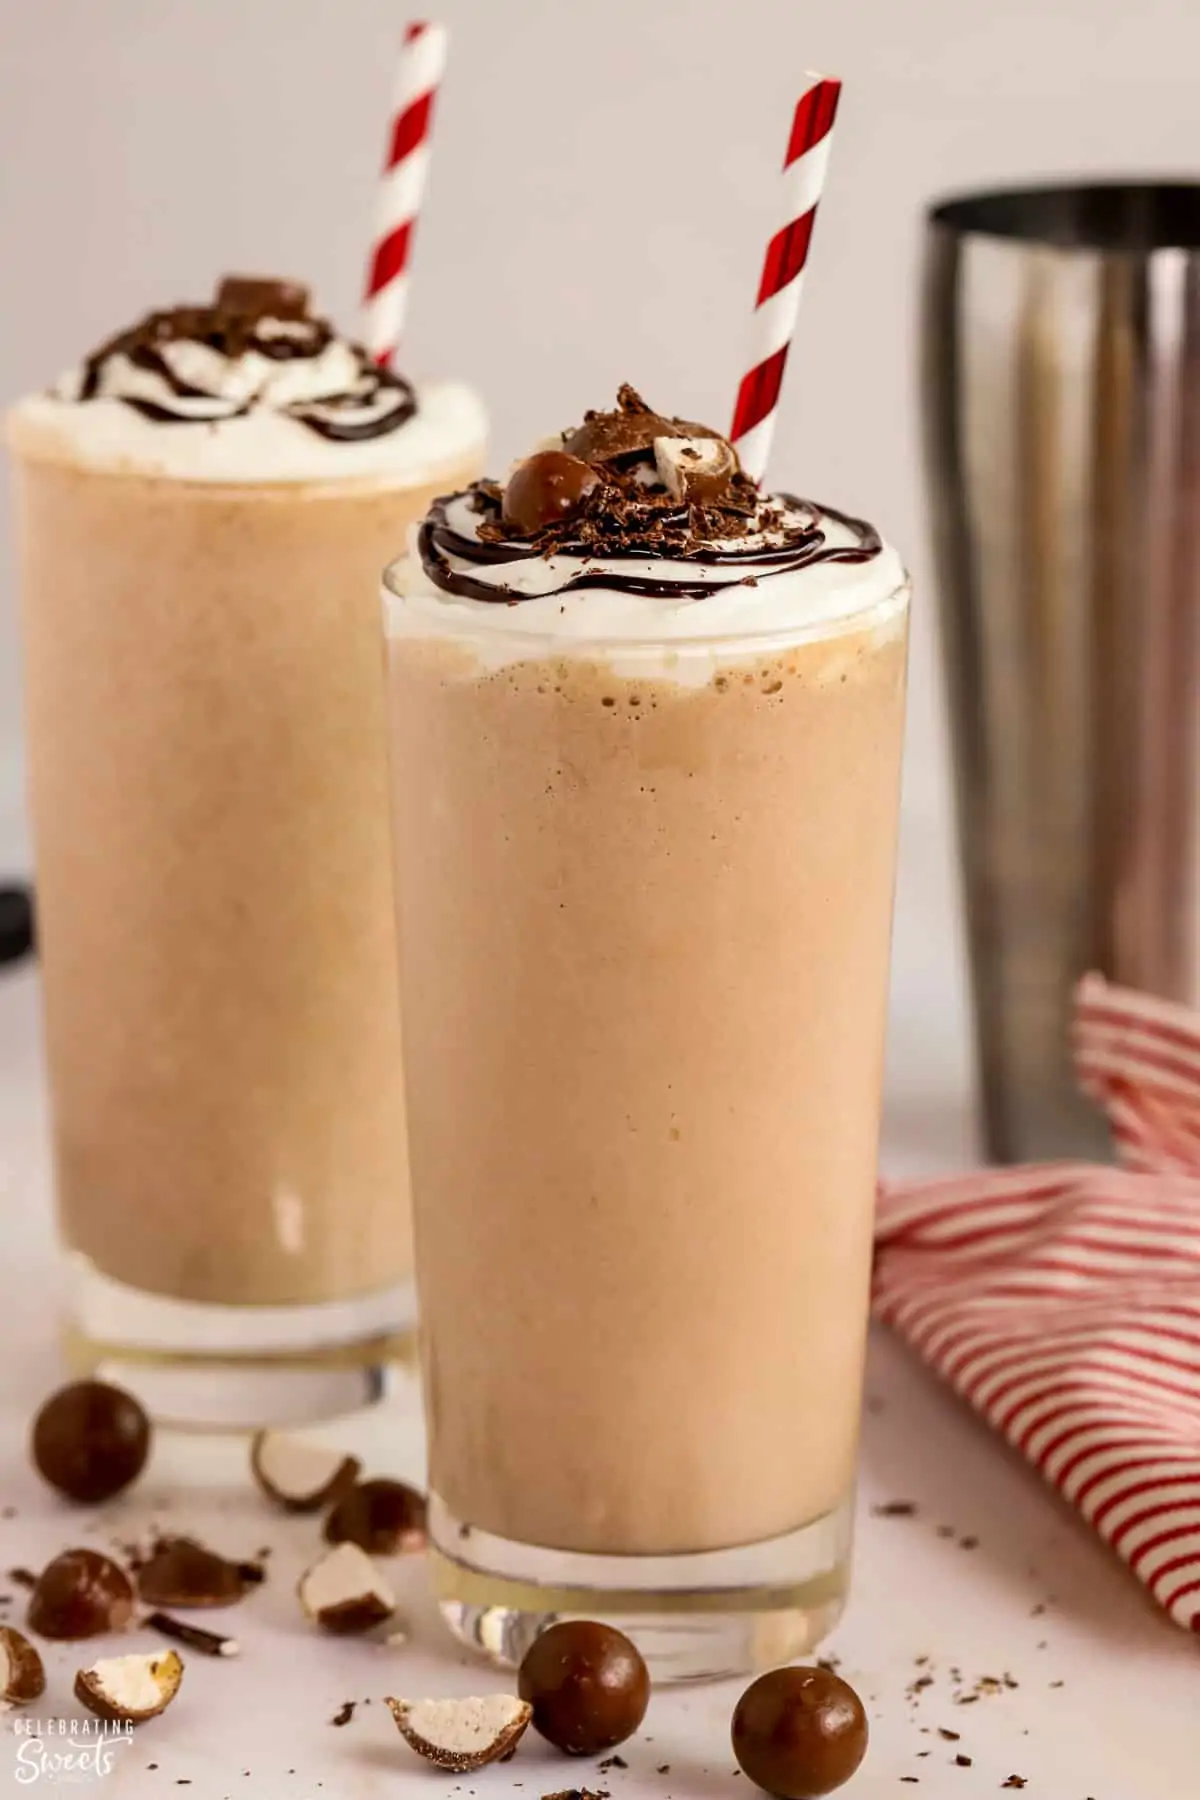 Two glasses filled with chocolate malt topped with whipped cream, chocolate sauce, and chopped malted milk balls.